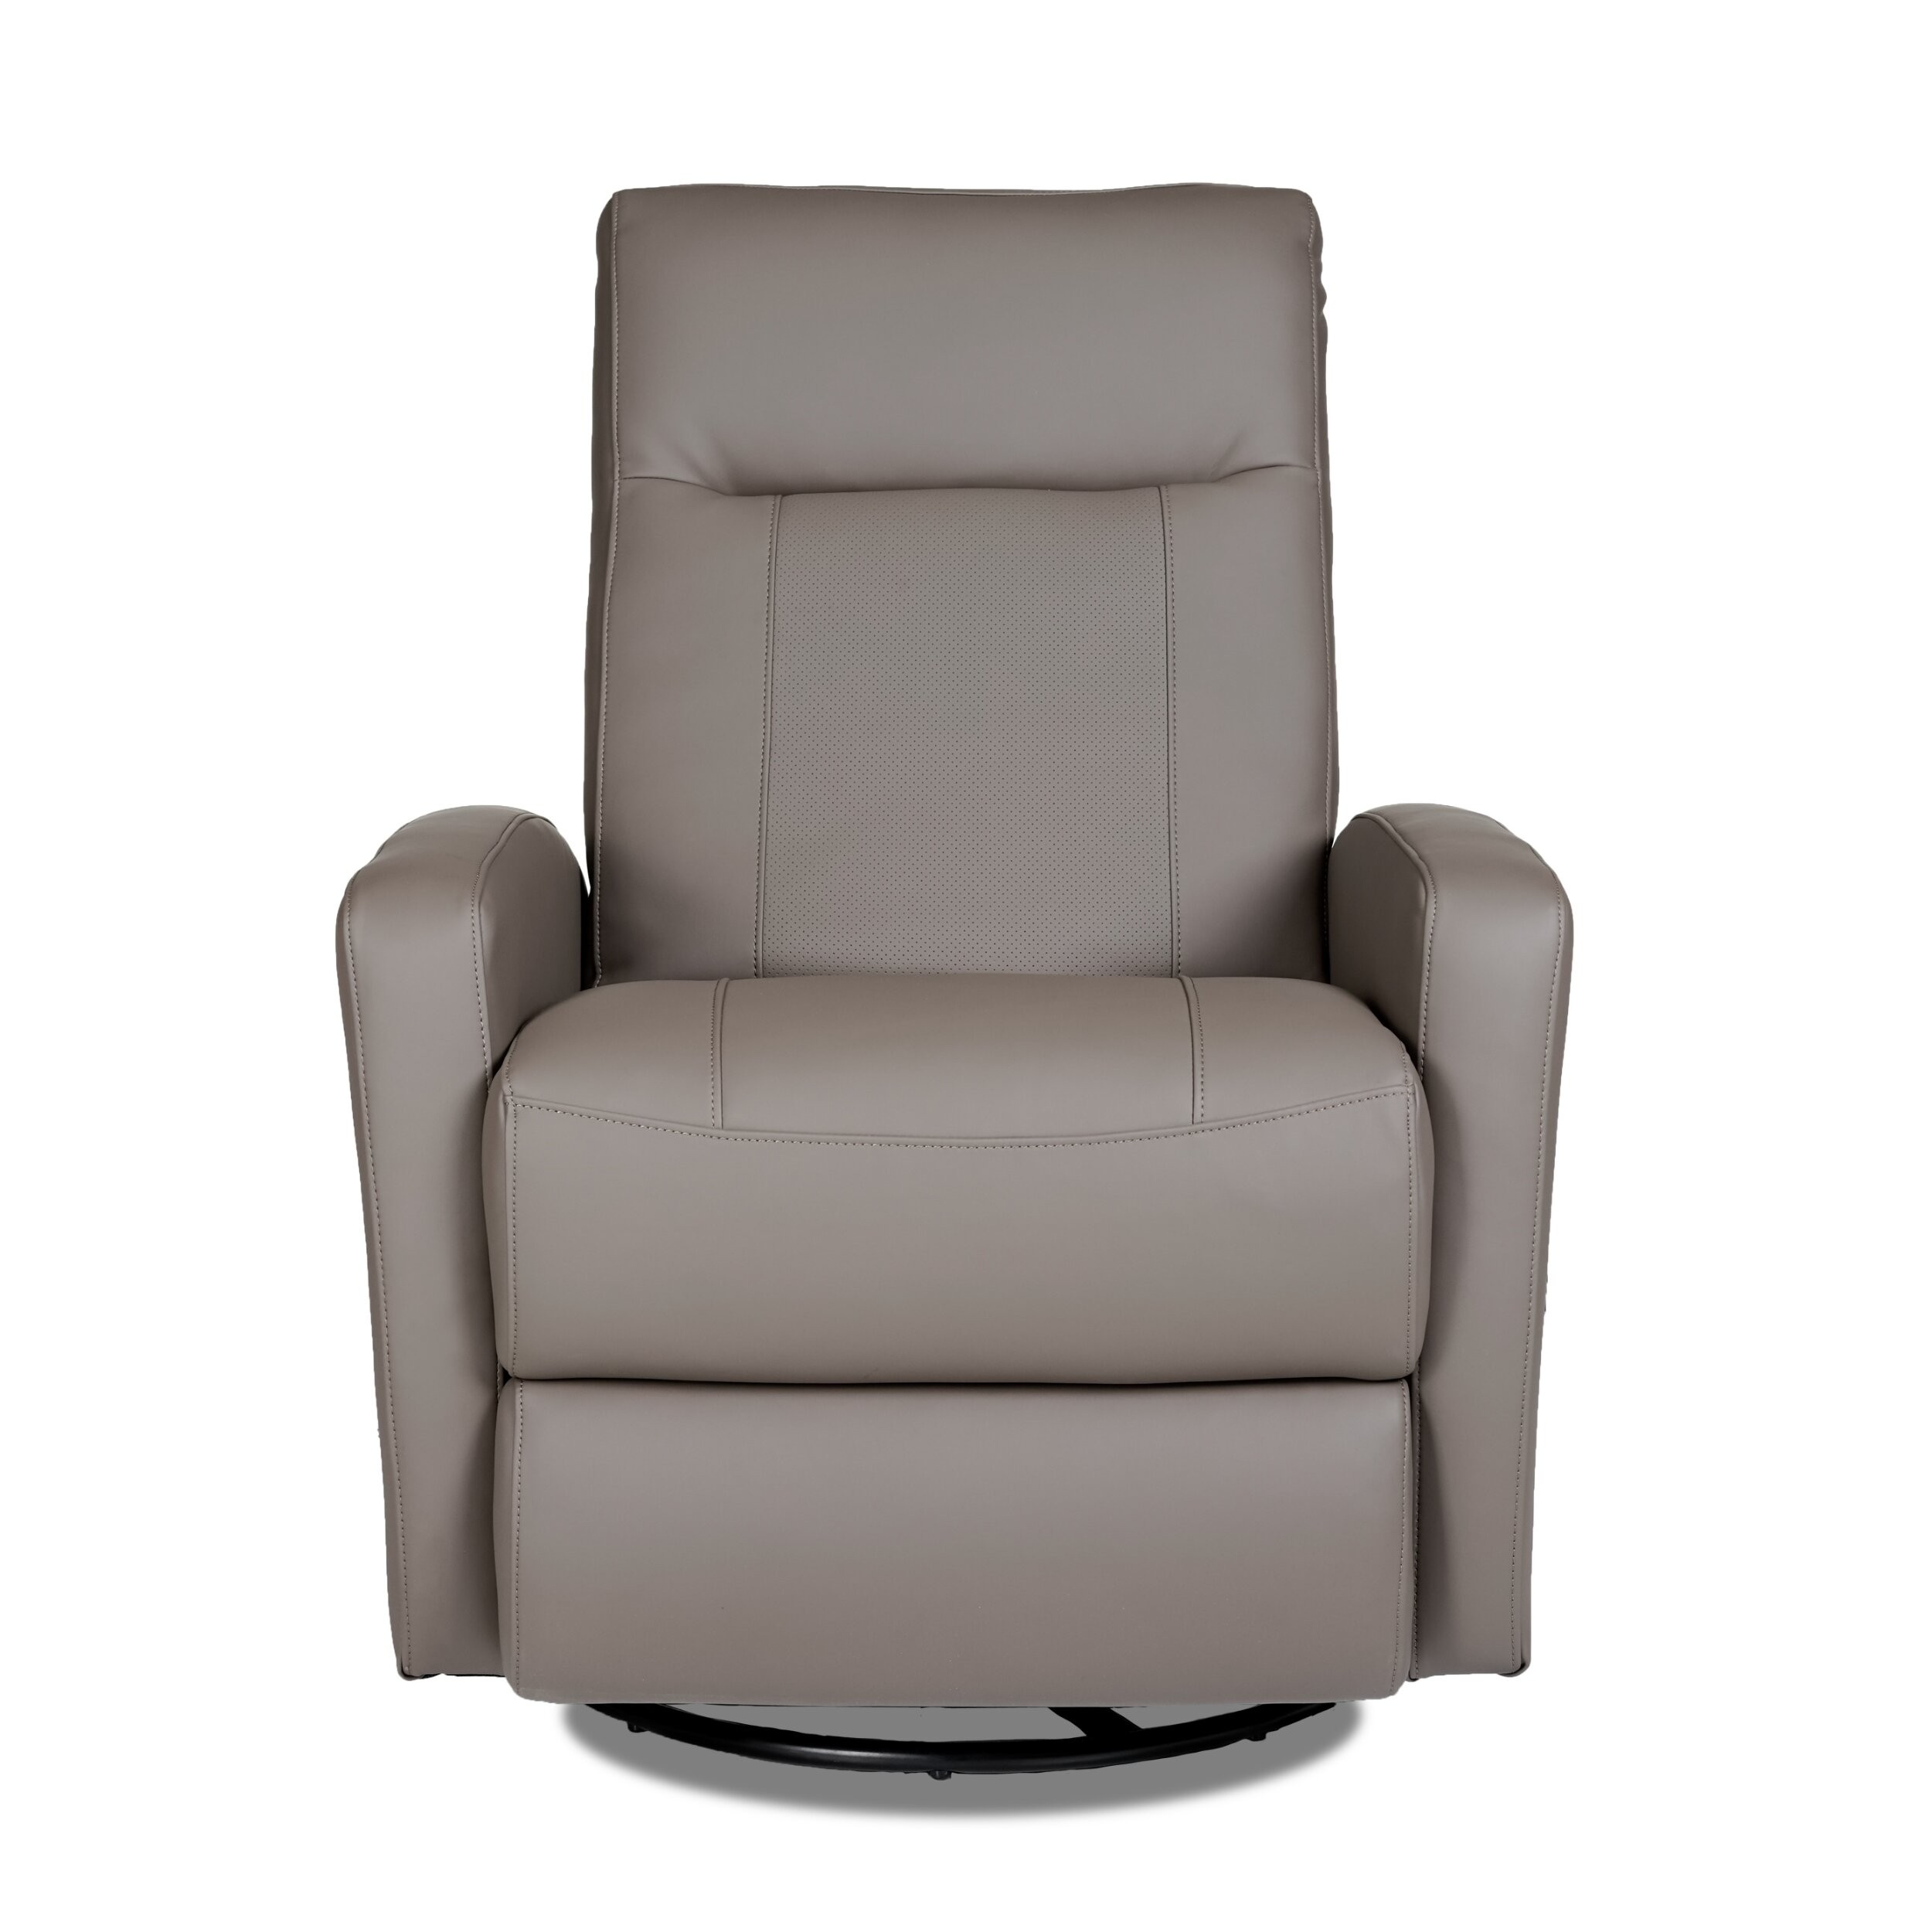 Polyester Blend Manual Swivel Glider Recliner With A Footrest